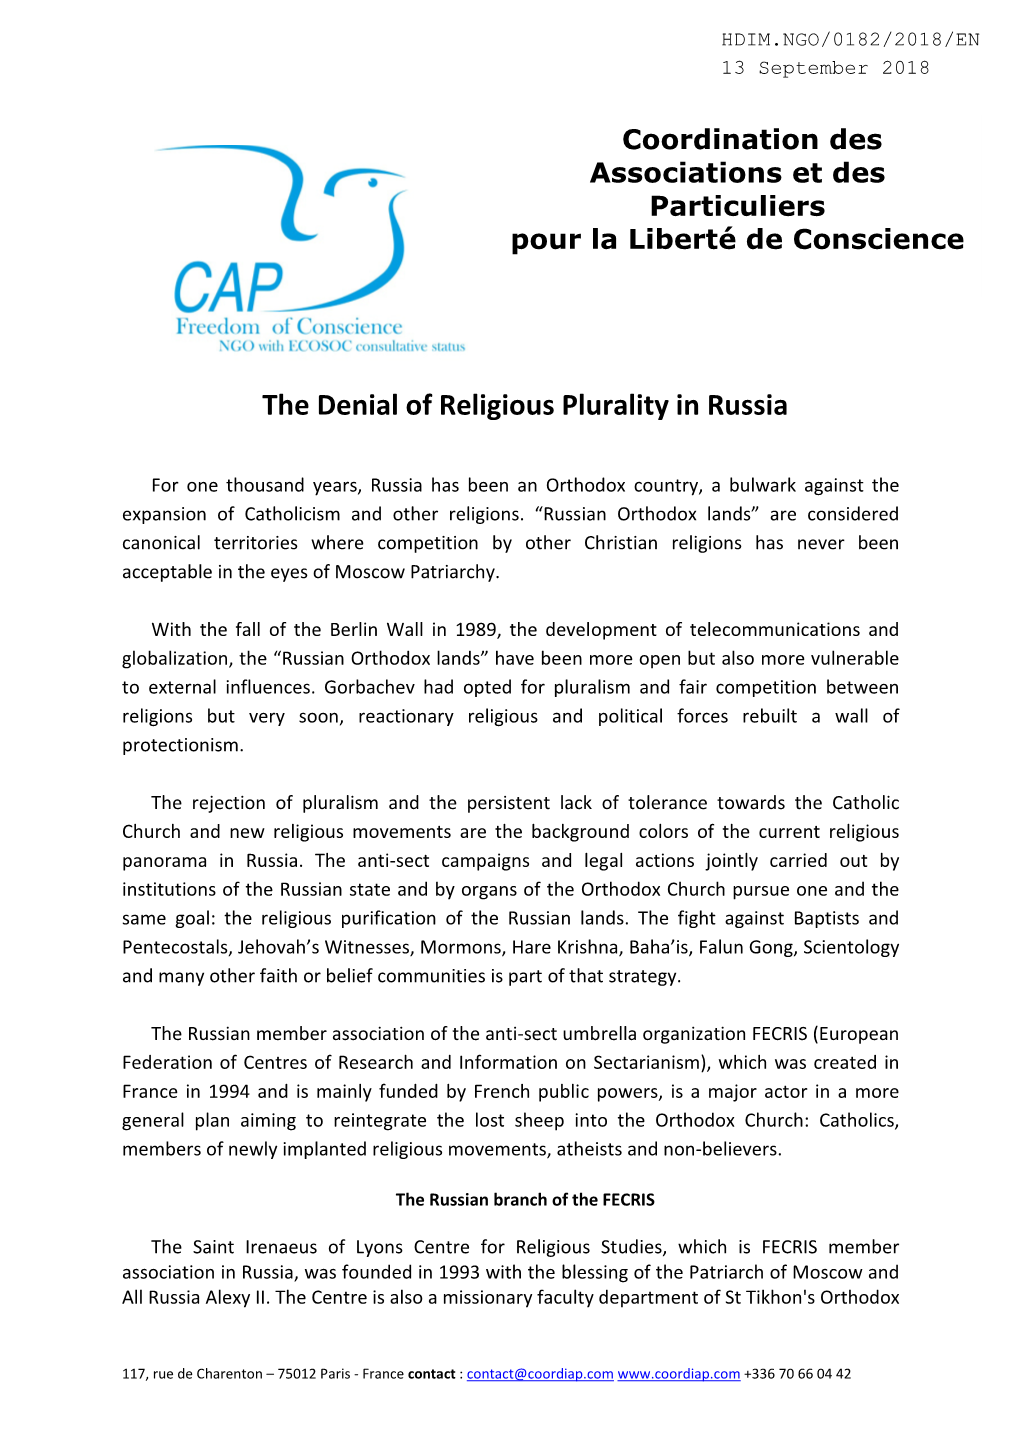 The Denial of Religious Plurality in Russia